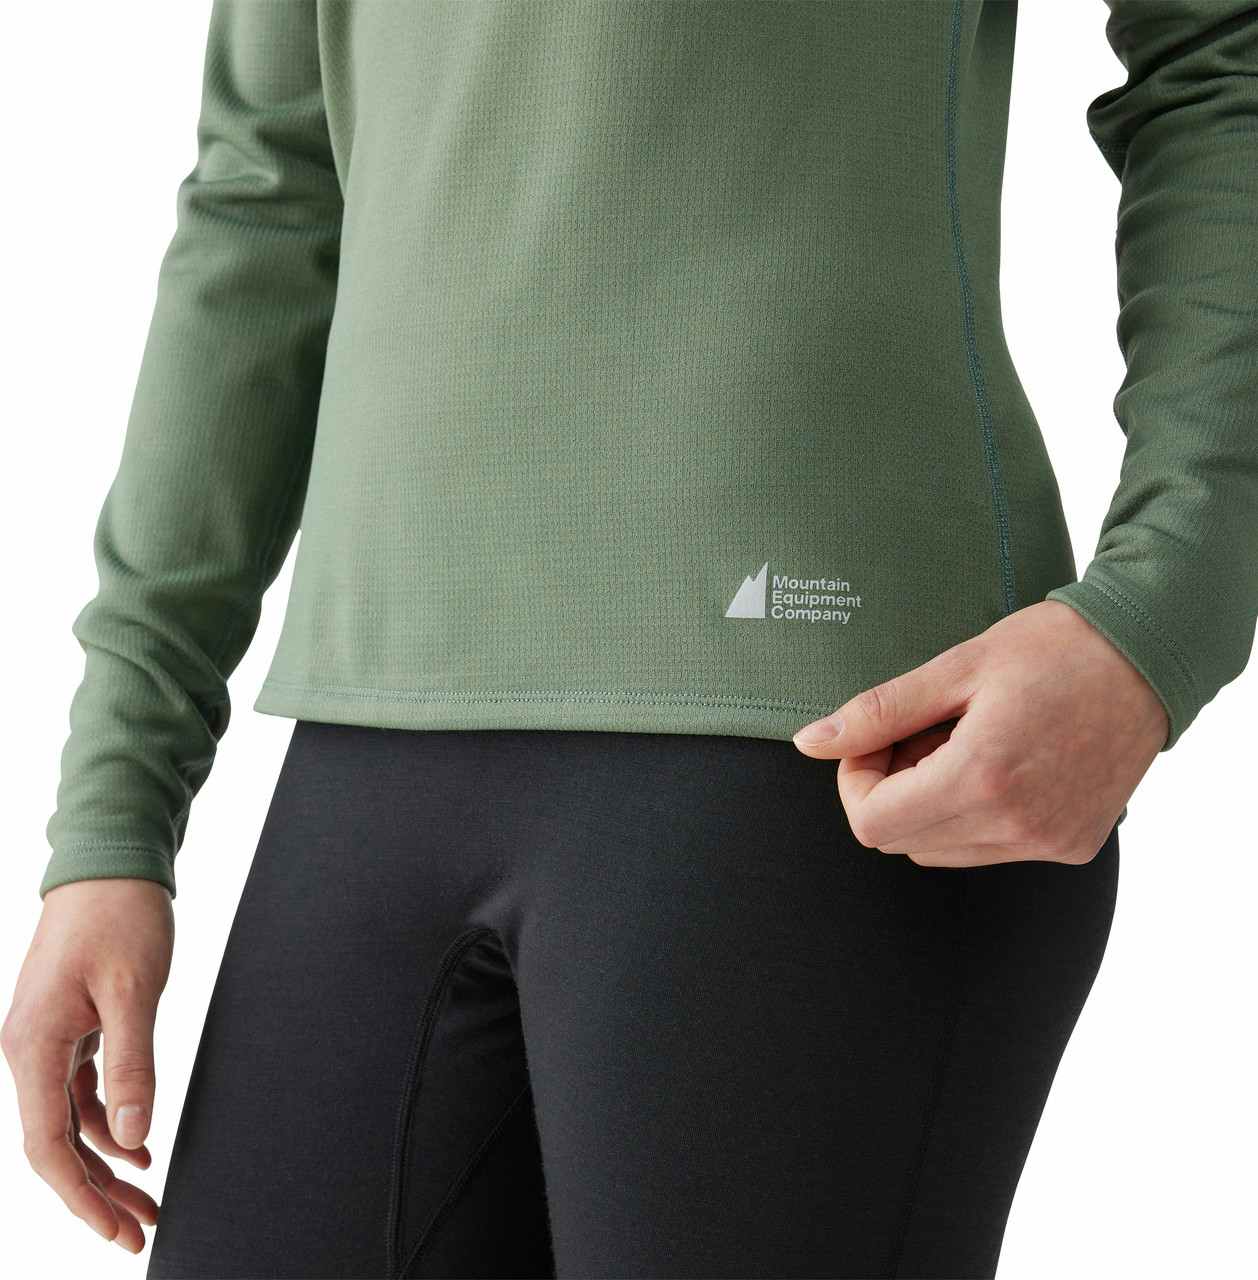 T3 Warmest Base Layer Long Sleeve Top Dark Forest